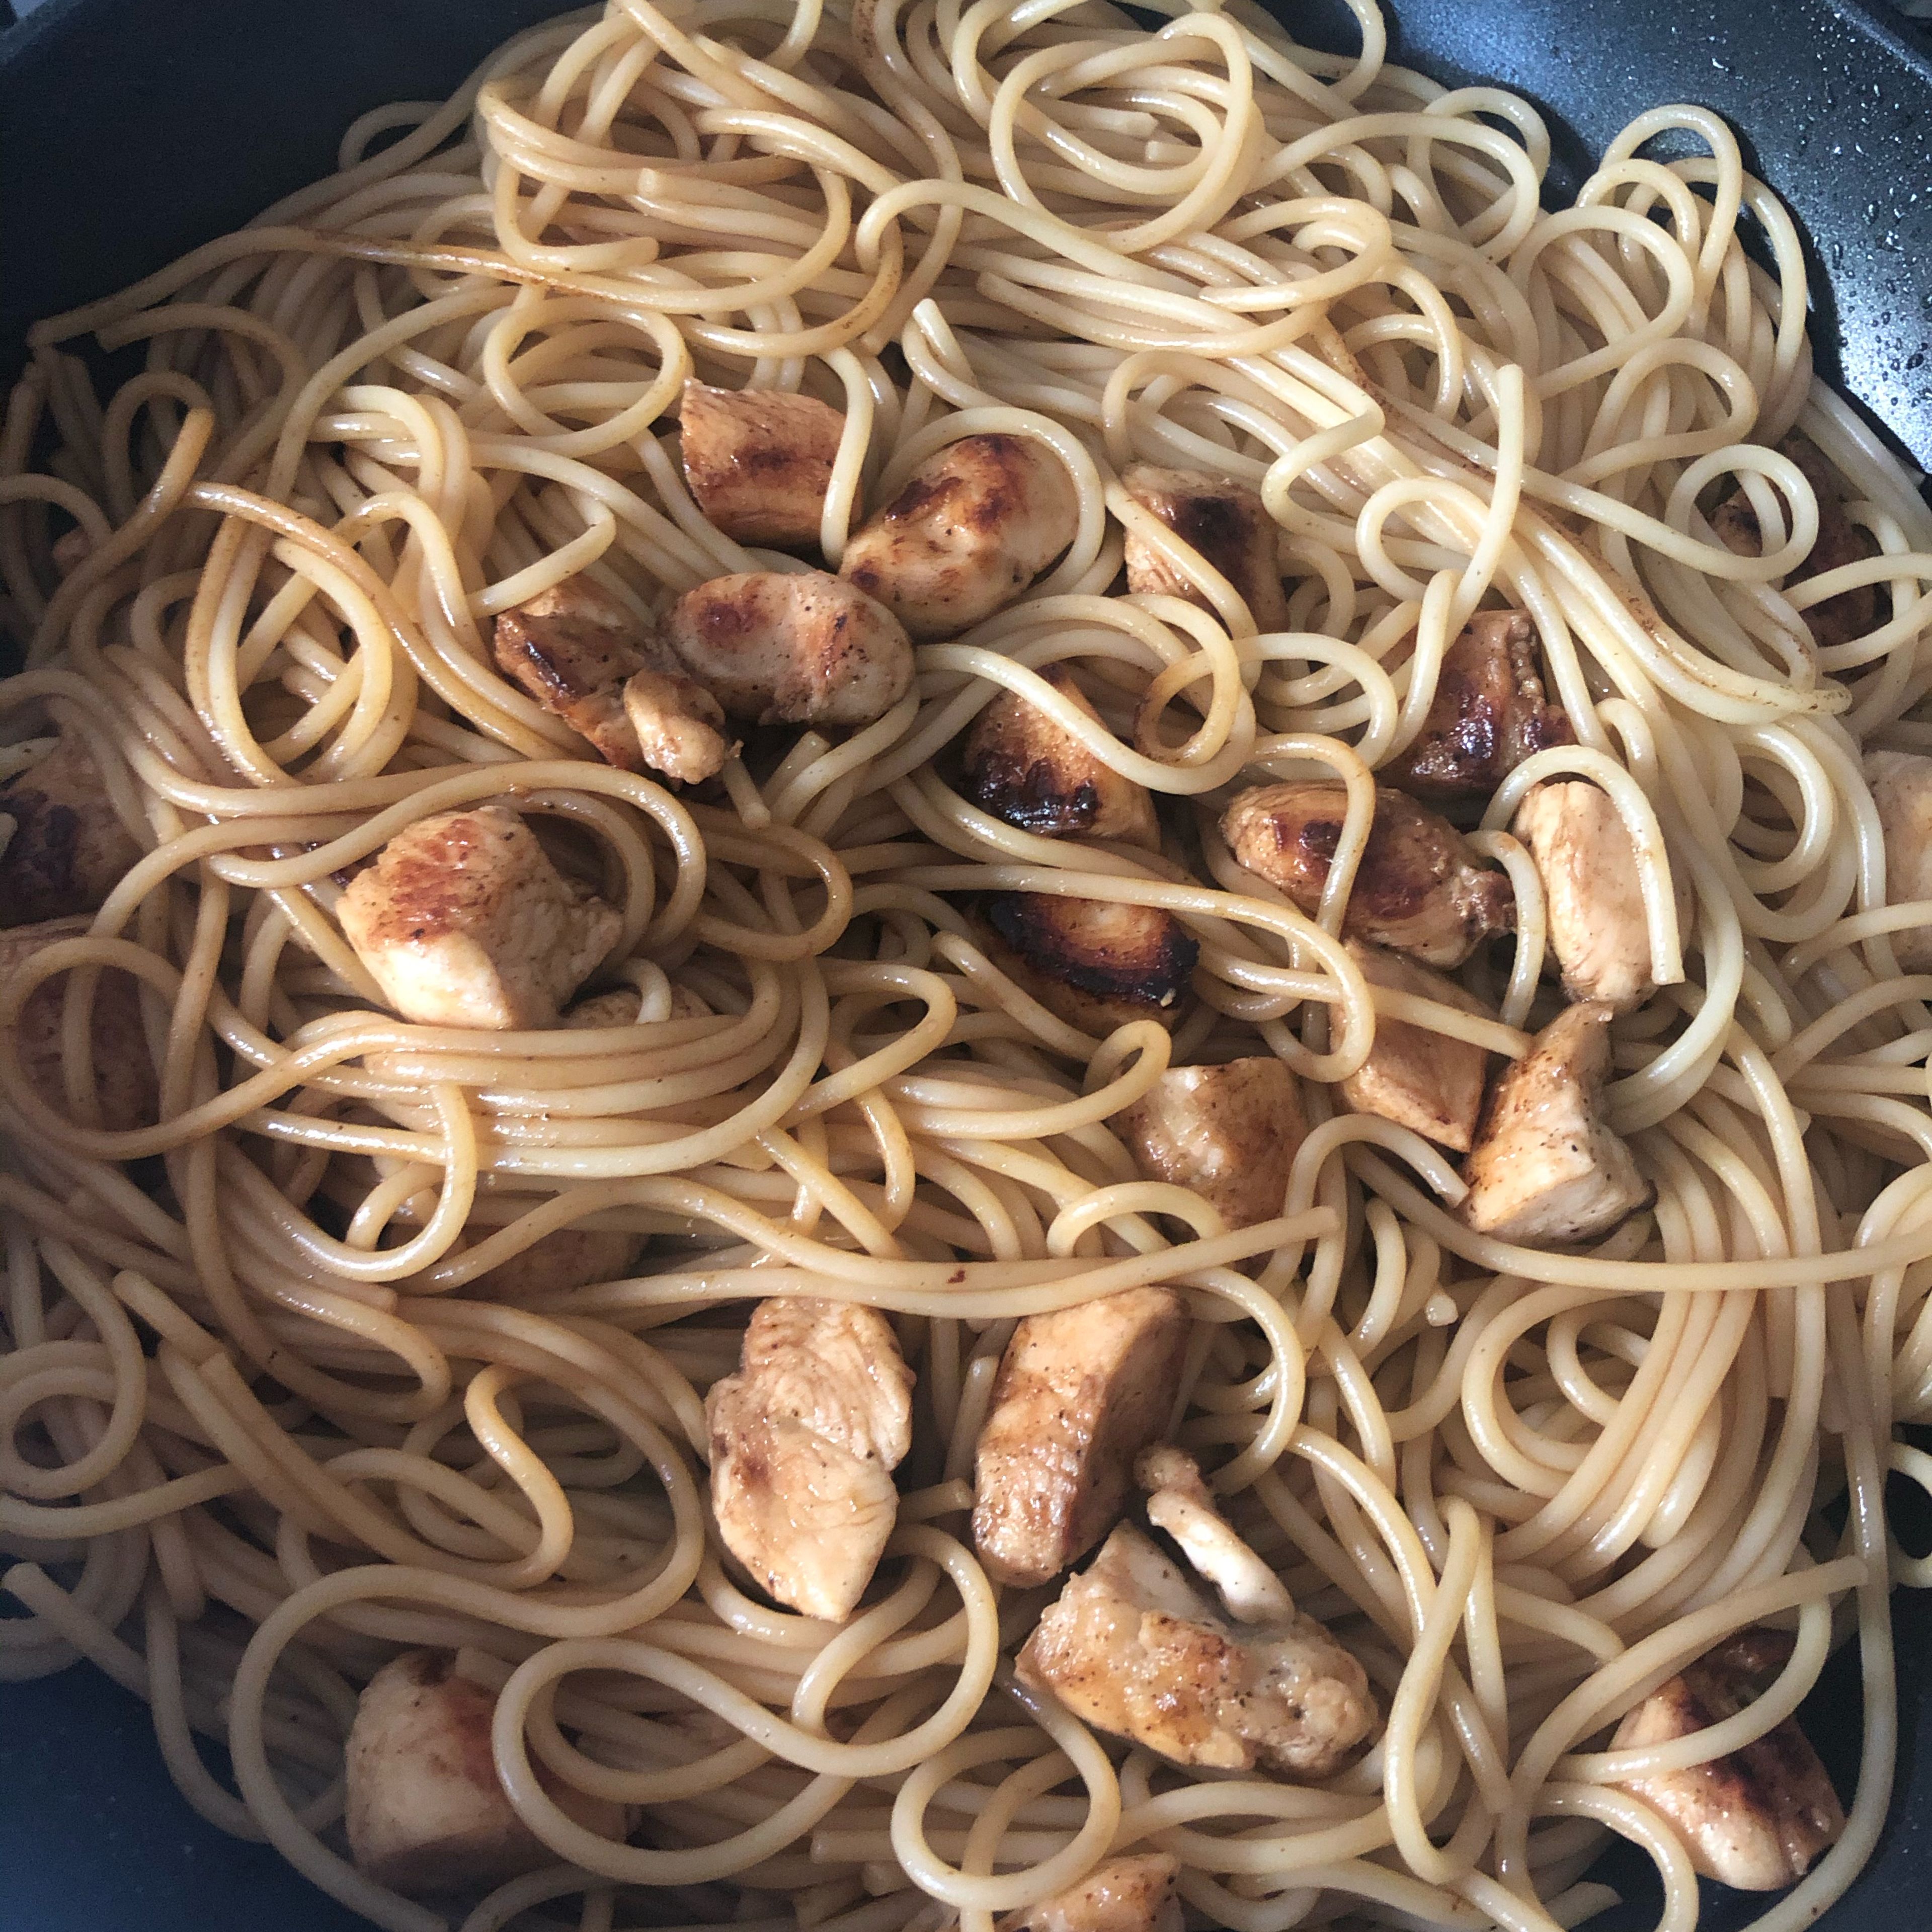 Take the pasta and put it in the fridge with the chicken. At the same time use the soy sauce to fry it all together. Fry it for about 2min shaking it constantly.